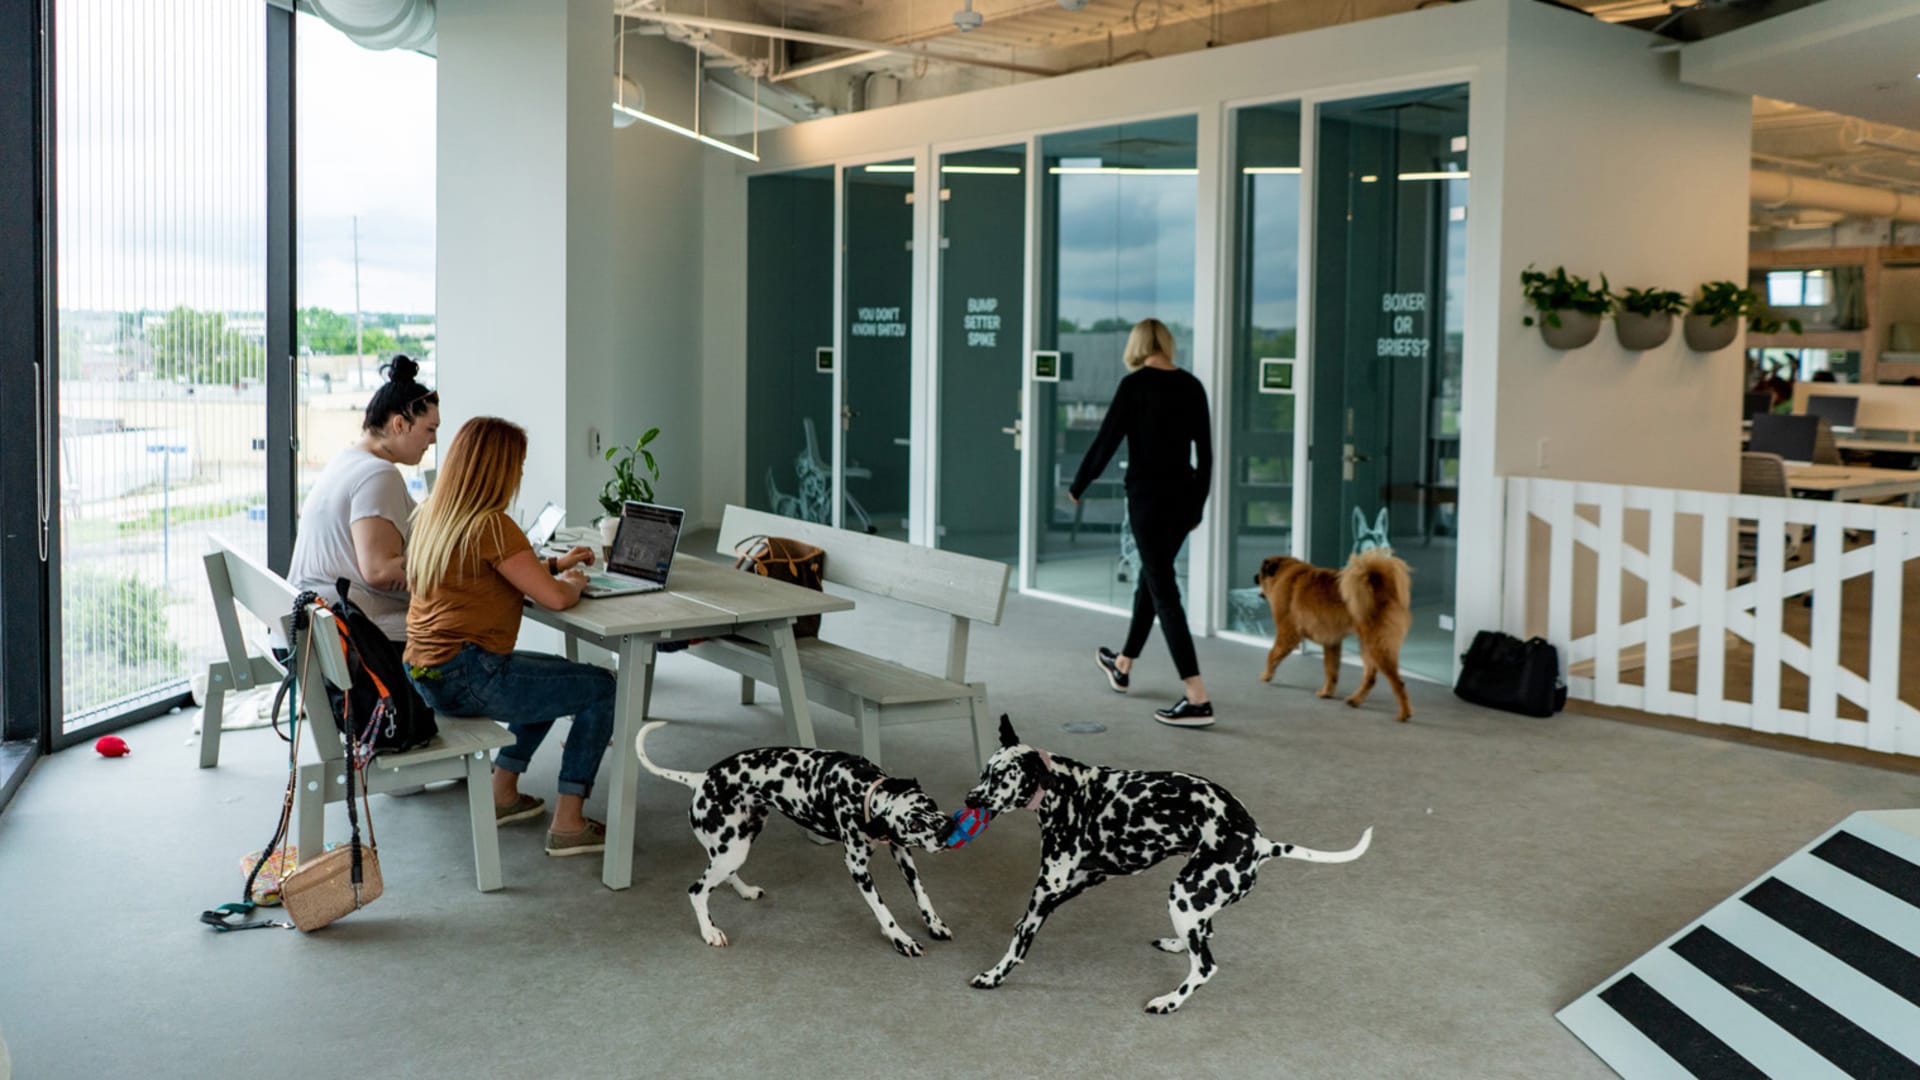 This is the most dog-friendly office ever